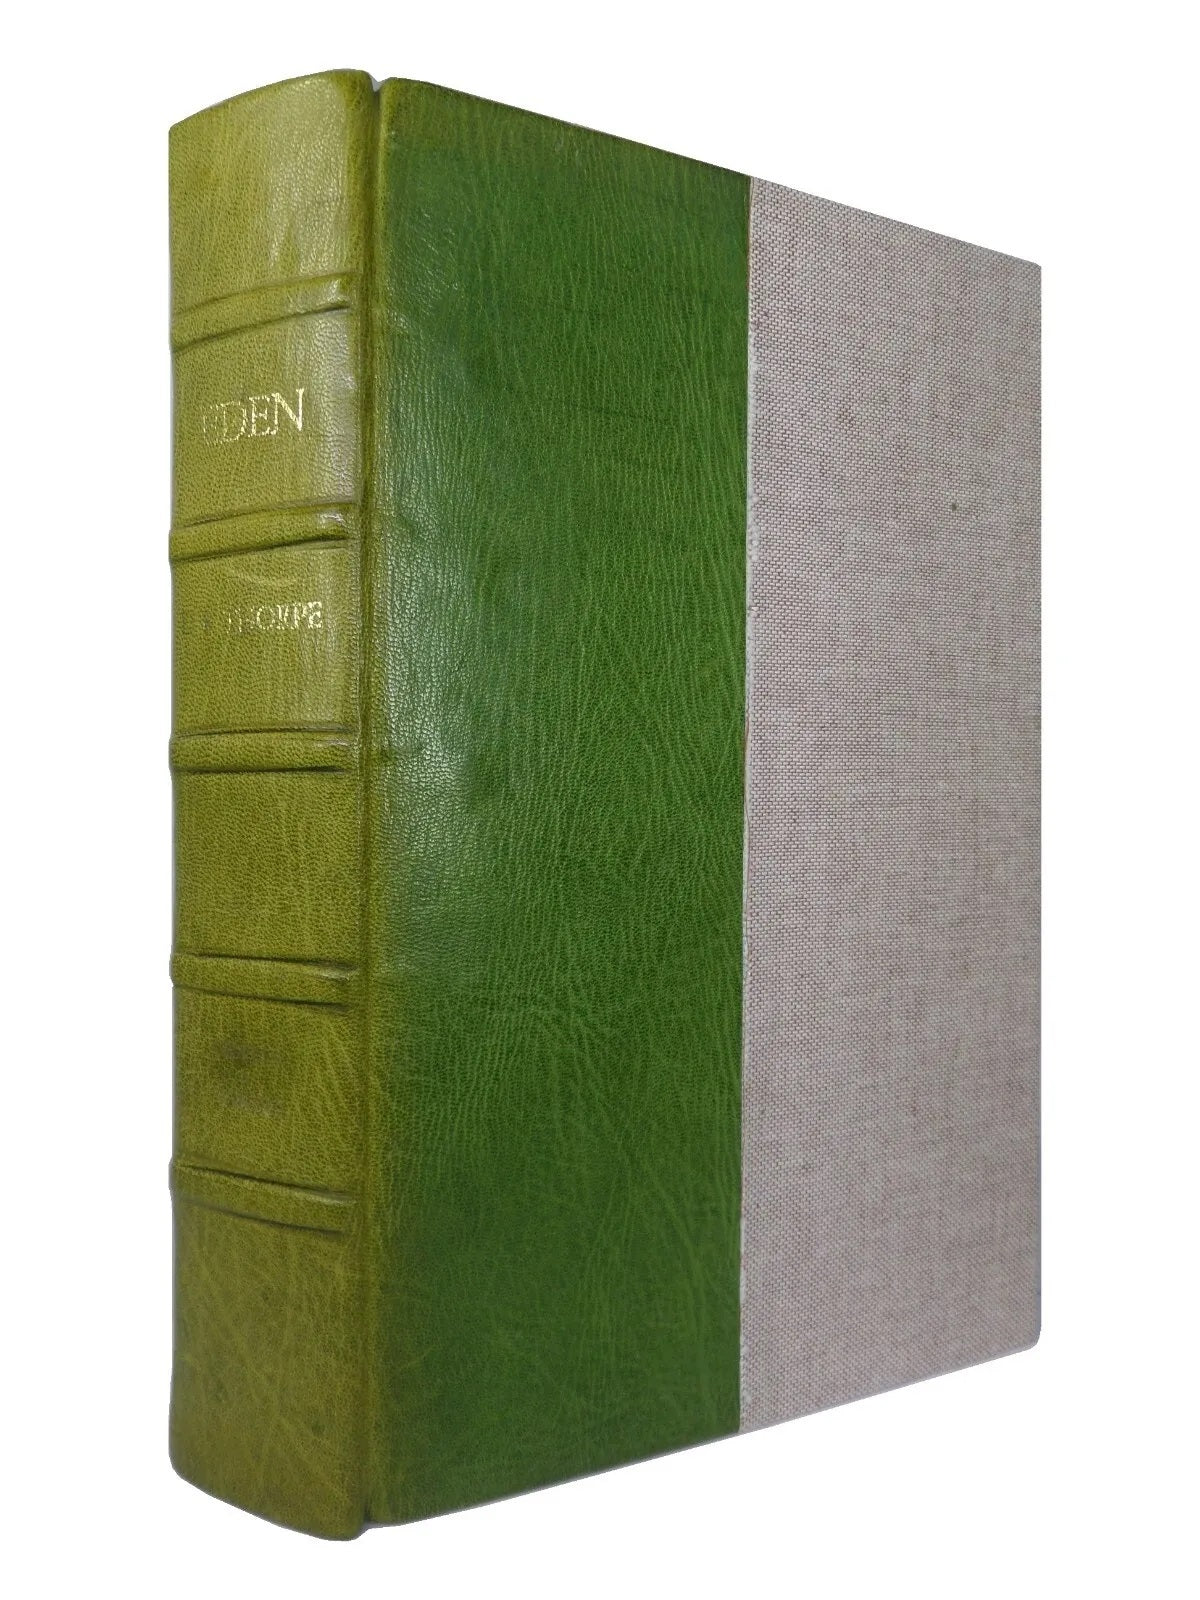 EDEN: THE LIFE AND TIMES OF ANTHONY EDEN FIRST EARL OF AVON 1897-1977 BY D.R. THORPE 2003 FIRST EDITION